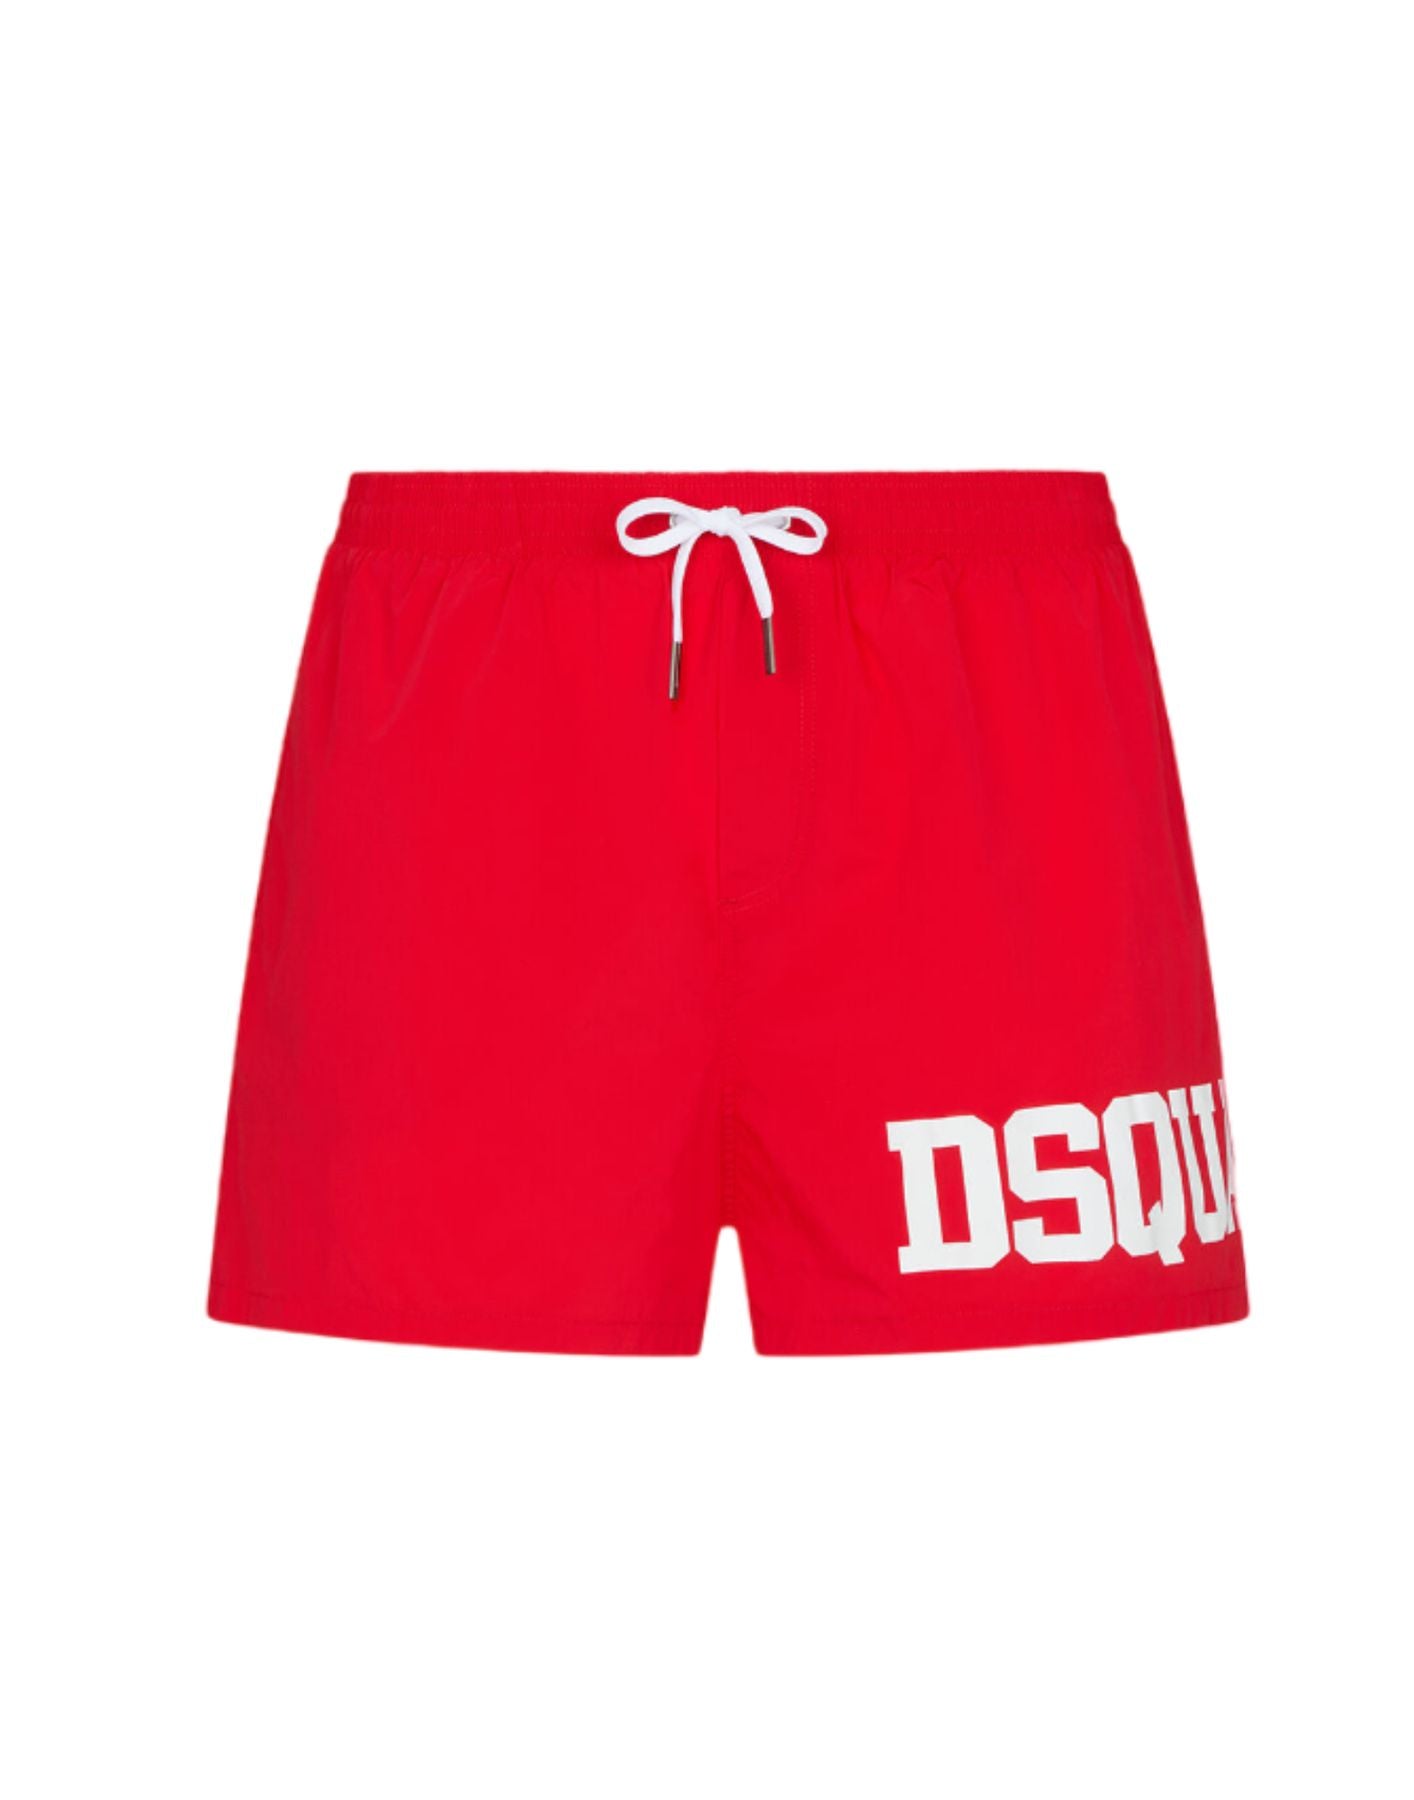 Swimwears for man D7B8P5440 RED/WHITE DSQUARED2